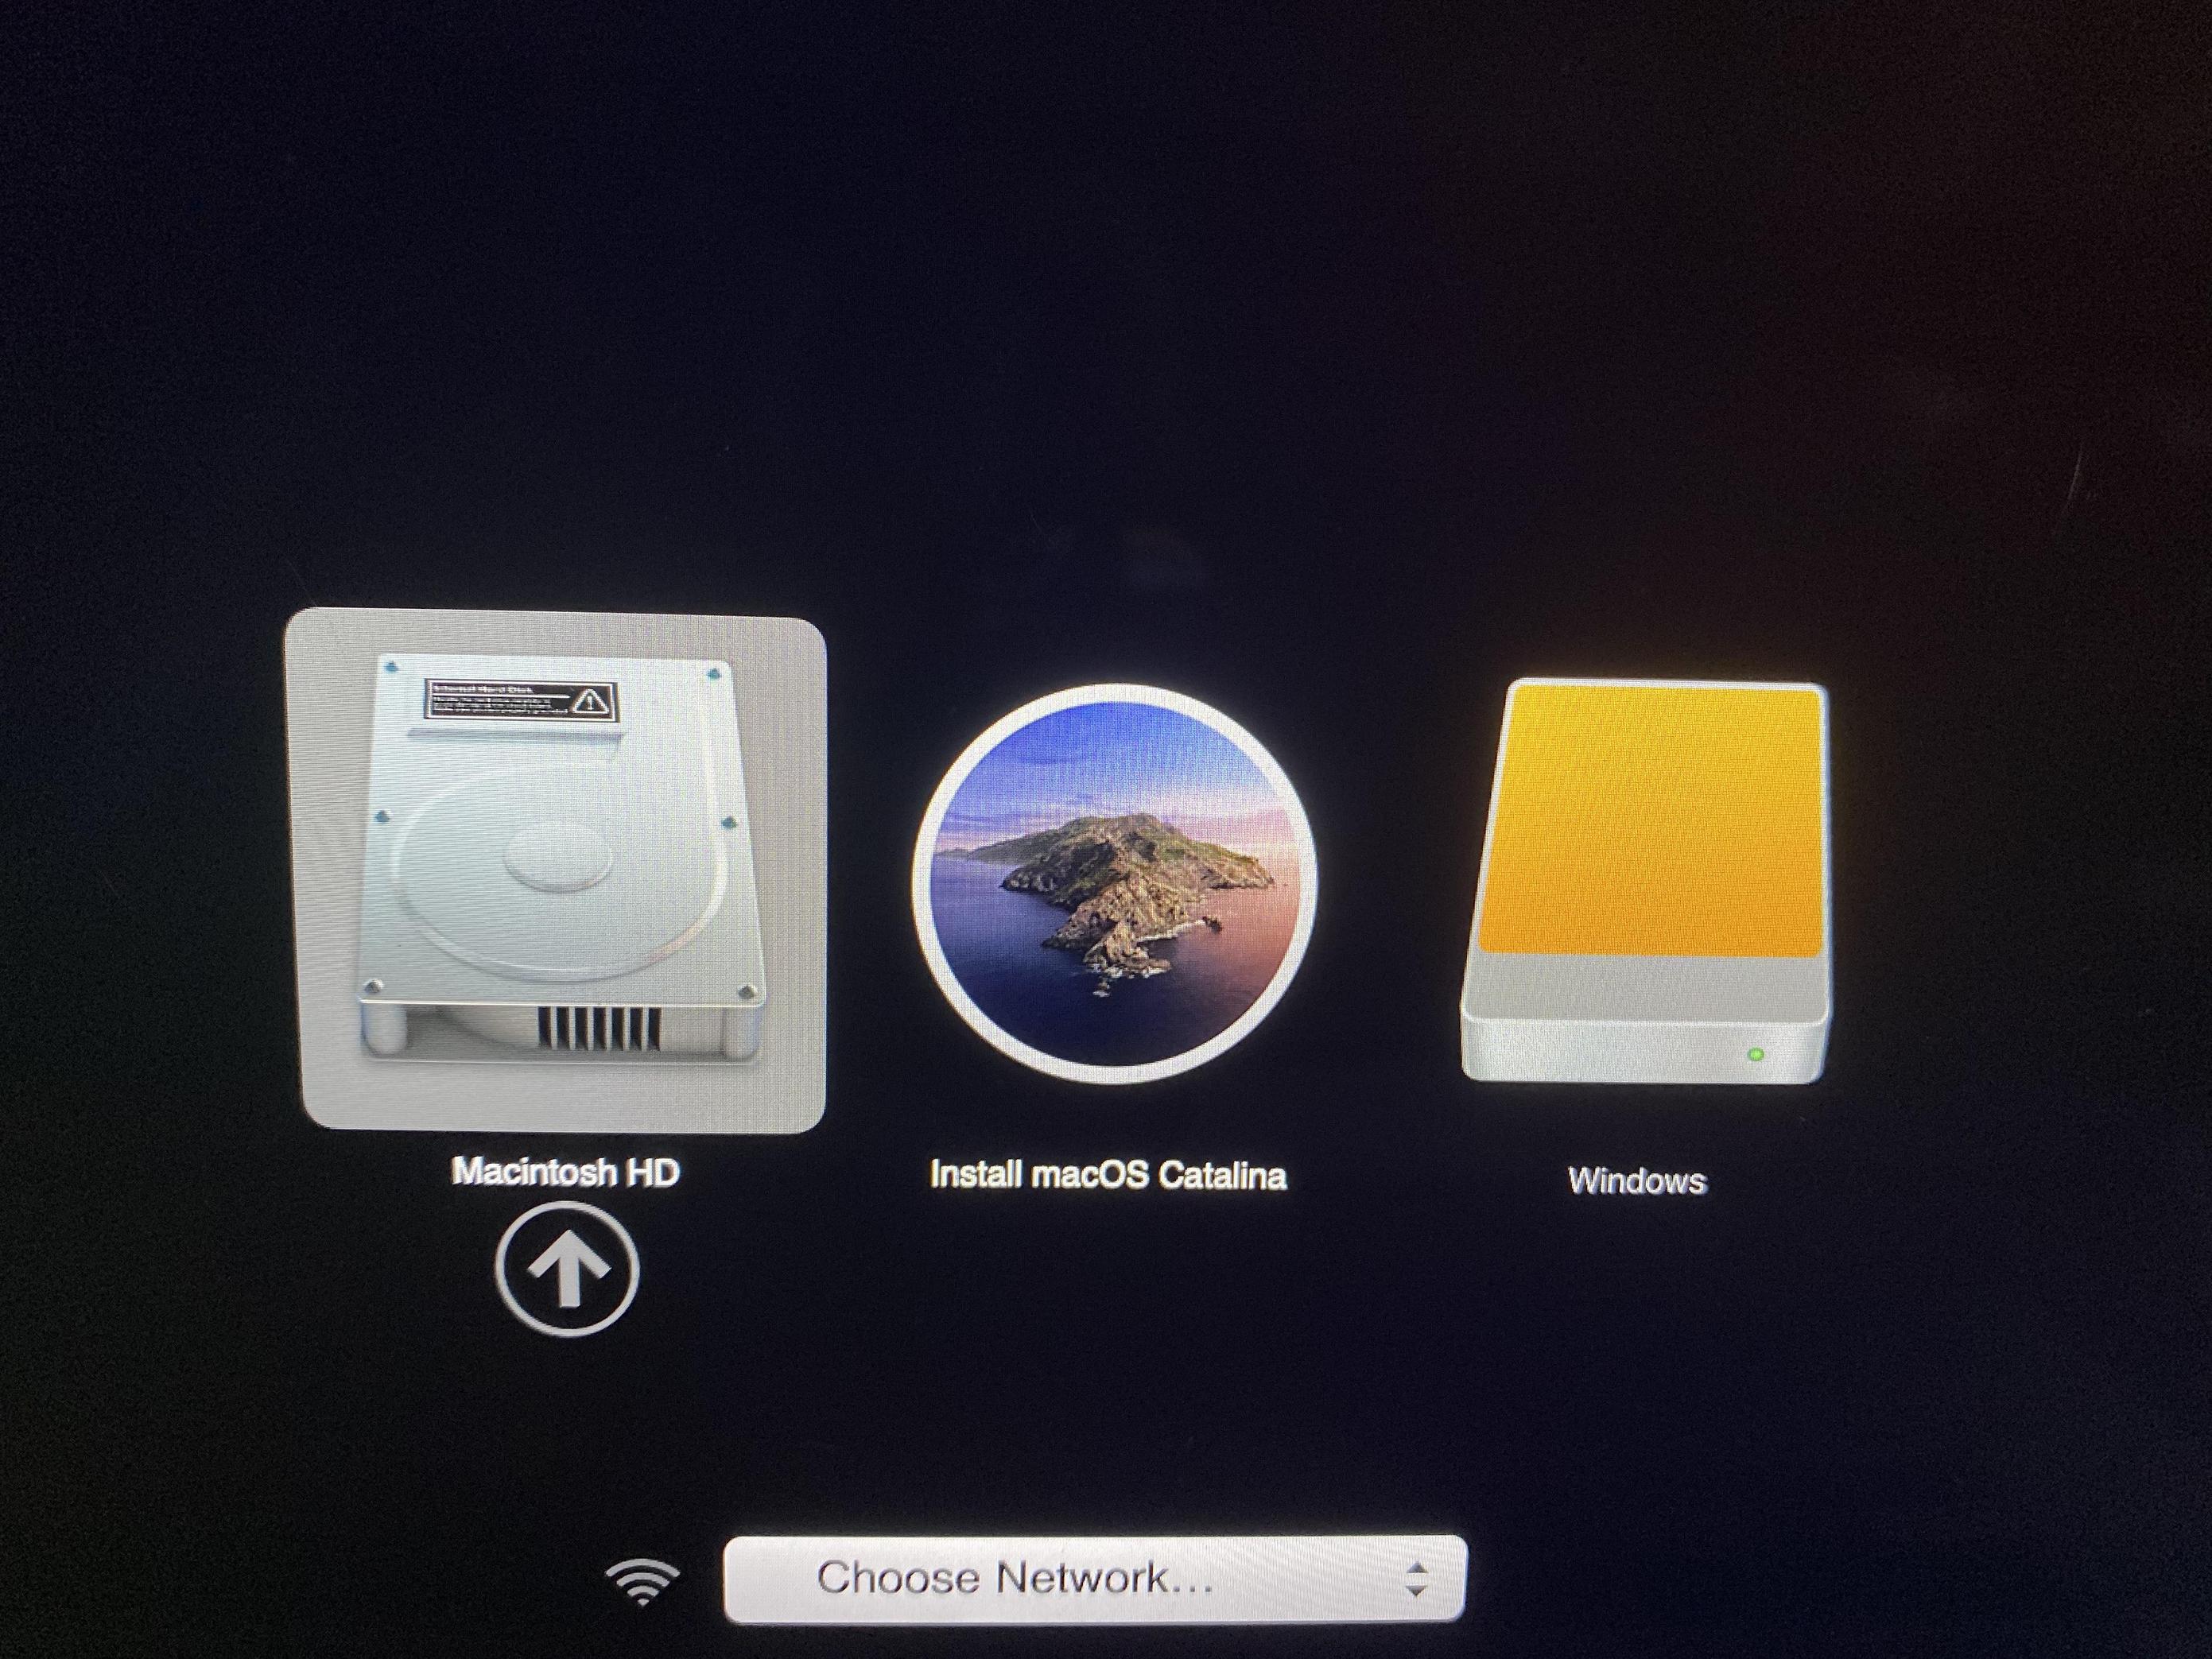 Macos Software That Can View Pictures On External Drive